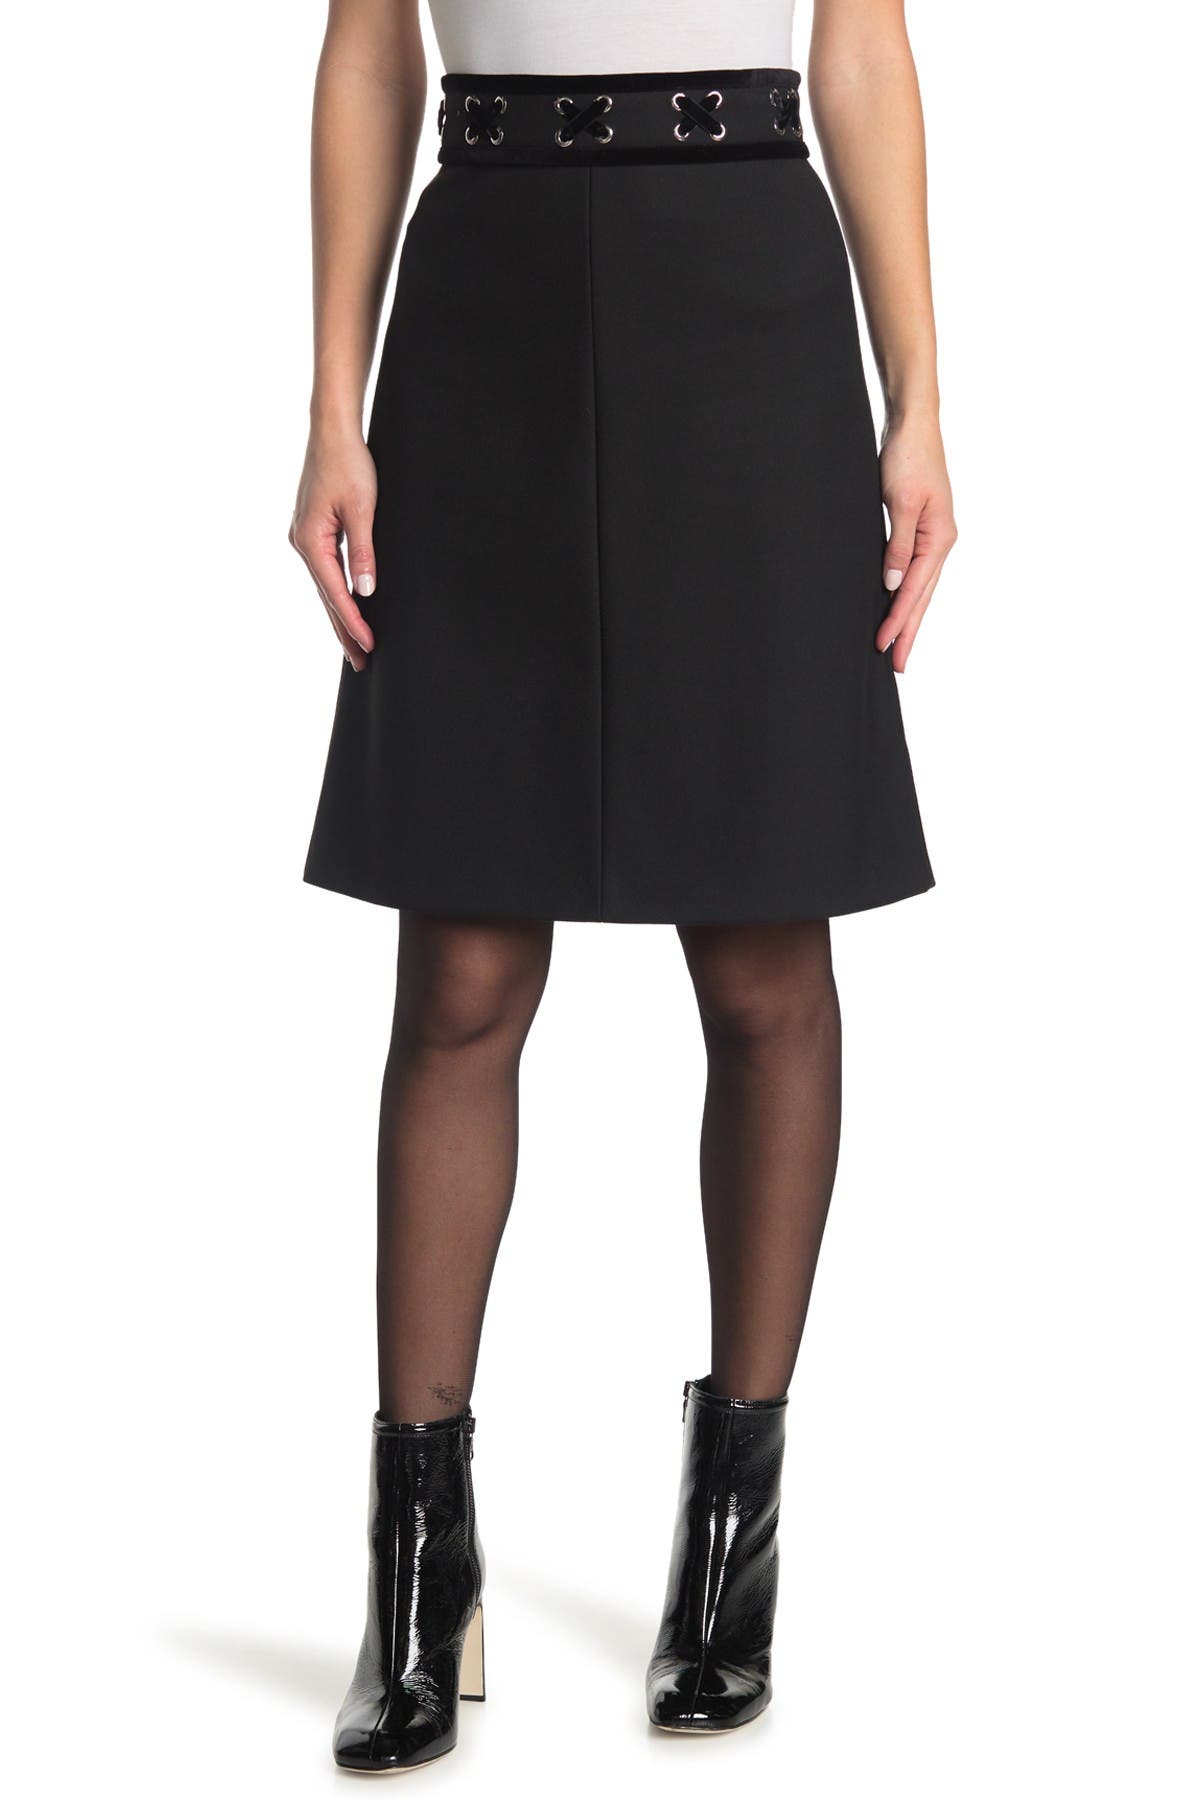 Red Valentino Grommet Trim Woven A-line Skirt In Nero 0no